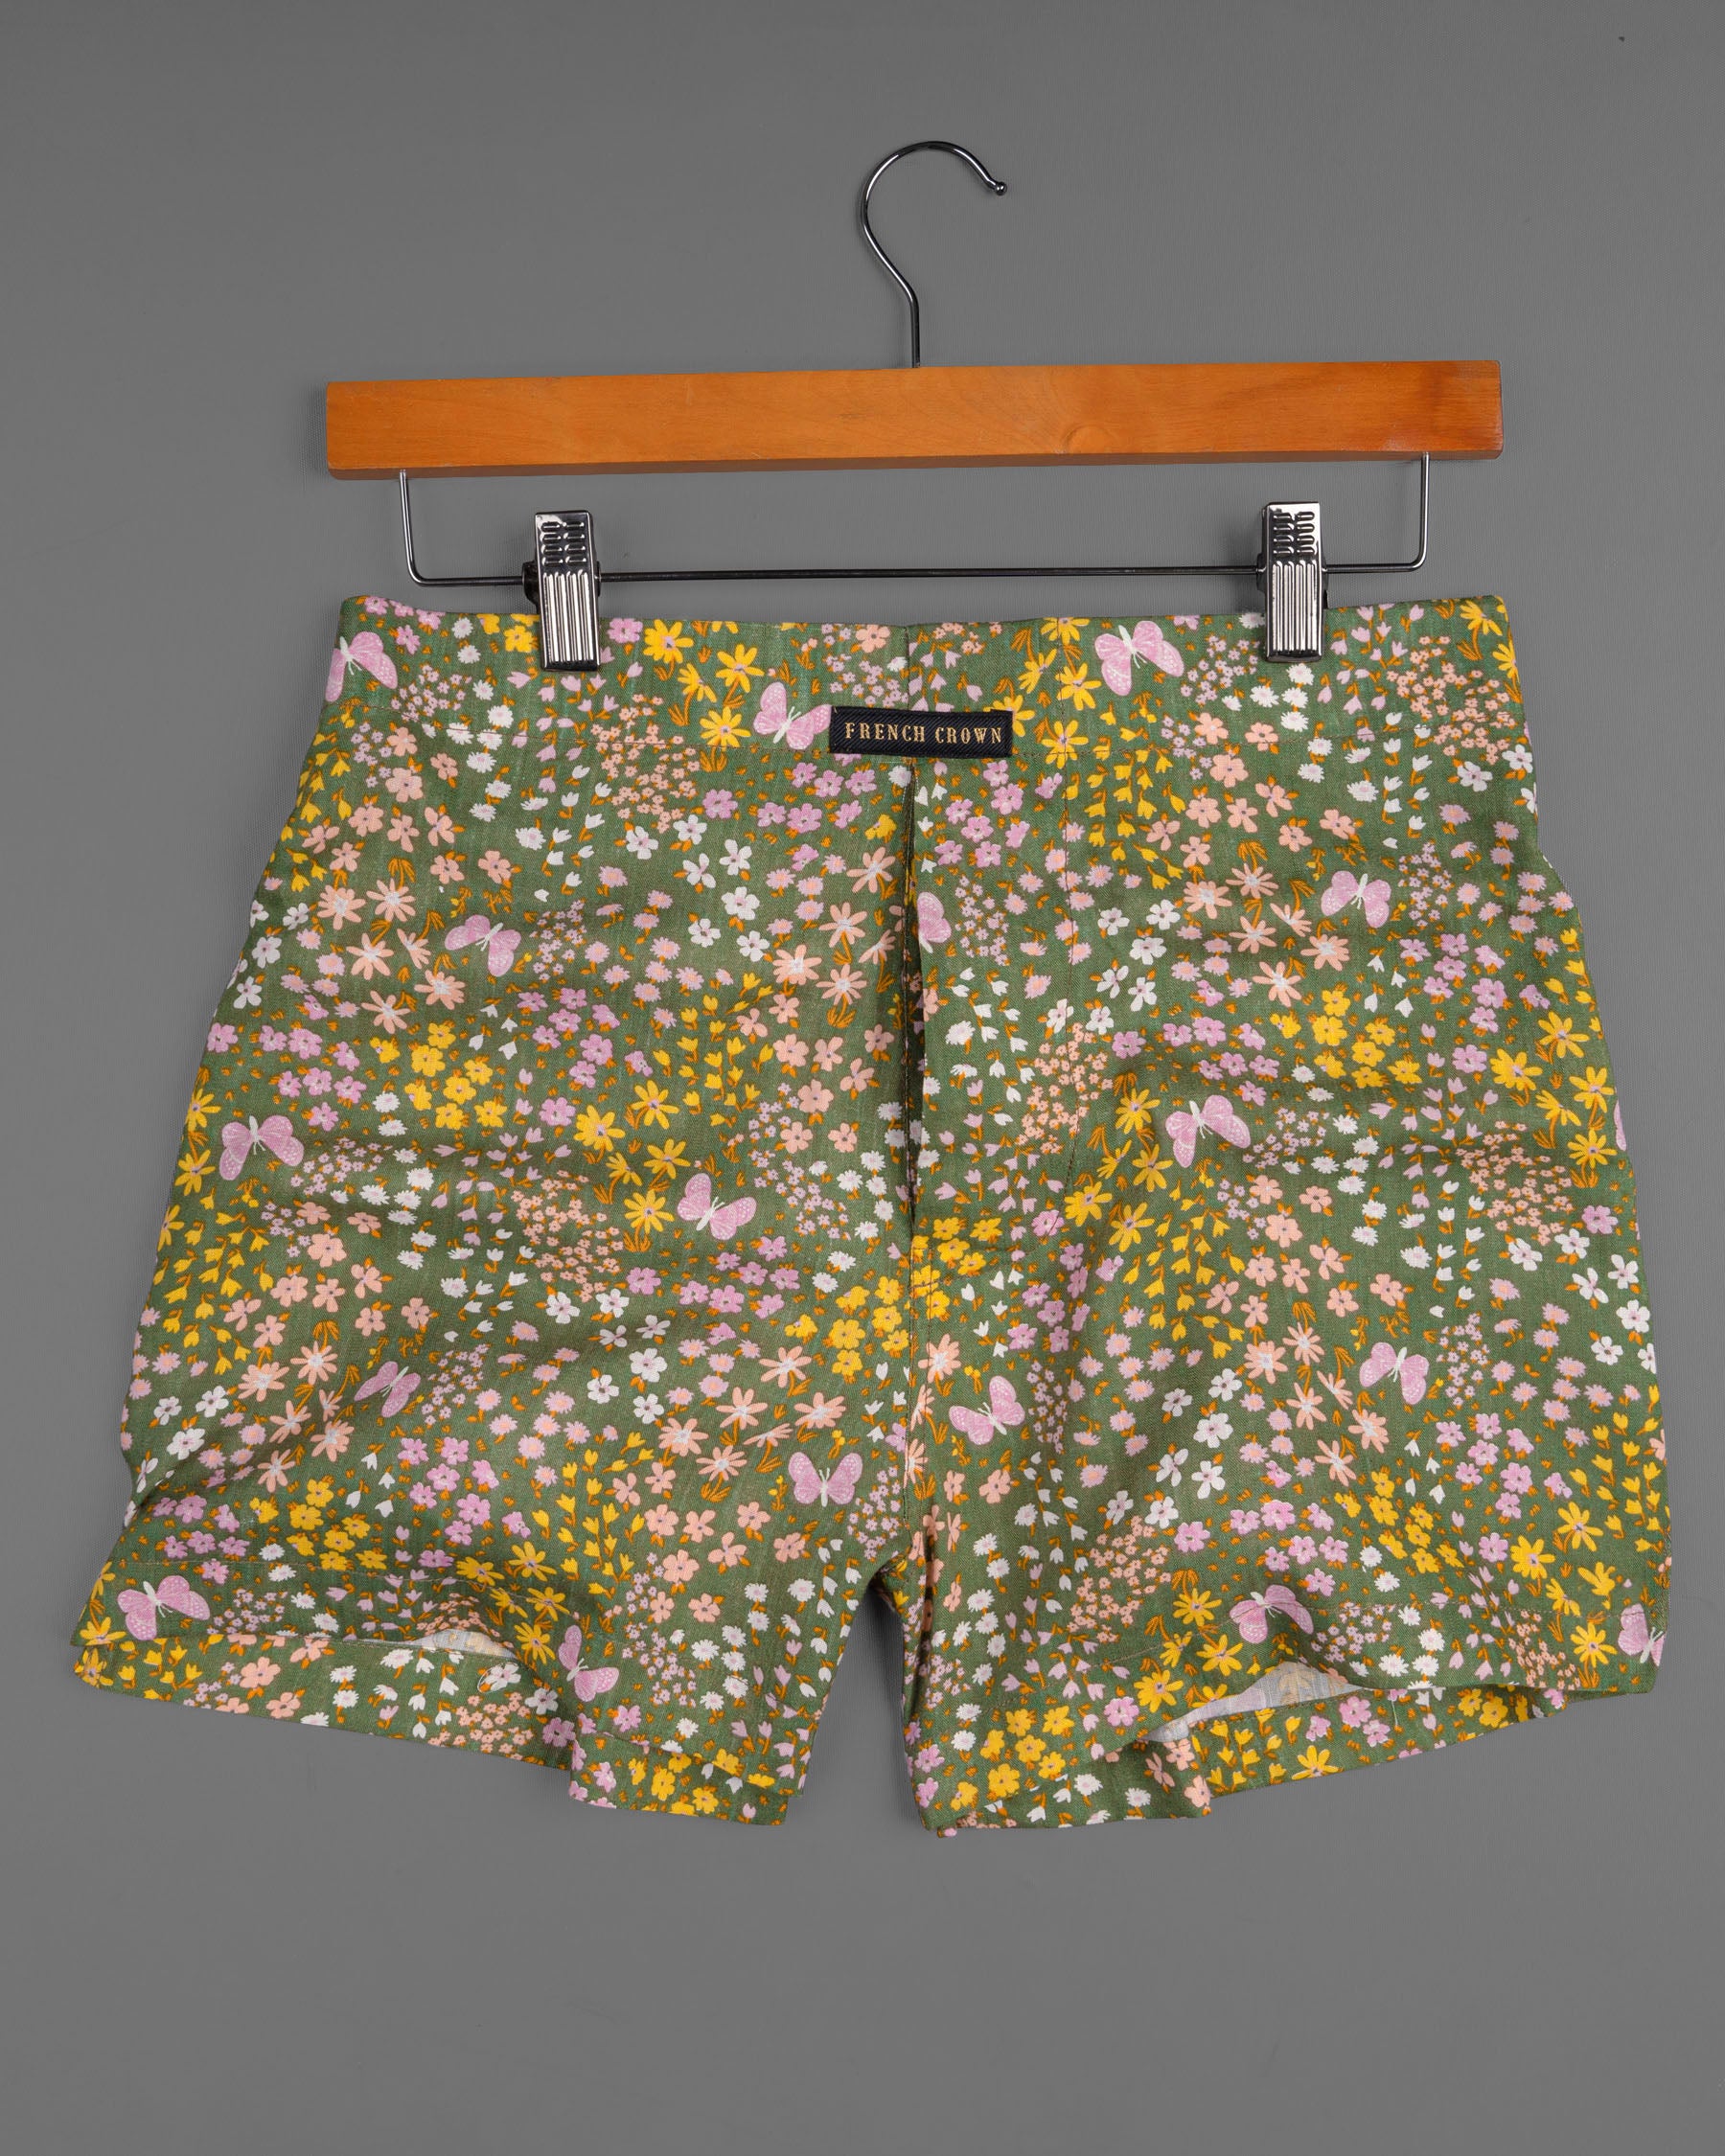 Bright White and Tamarillo Red with Camouflage Green and Saffron Floral Printed Premium Tencel Boxers BX422-28, BX422-30, BX422-32, BX422-34, BX422-36, BX422-38, BX422-40, BX422-42, BX422-44